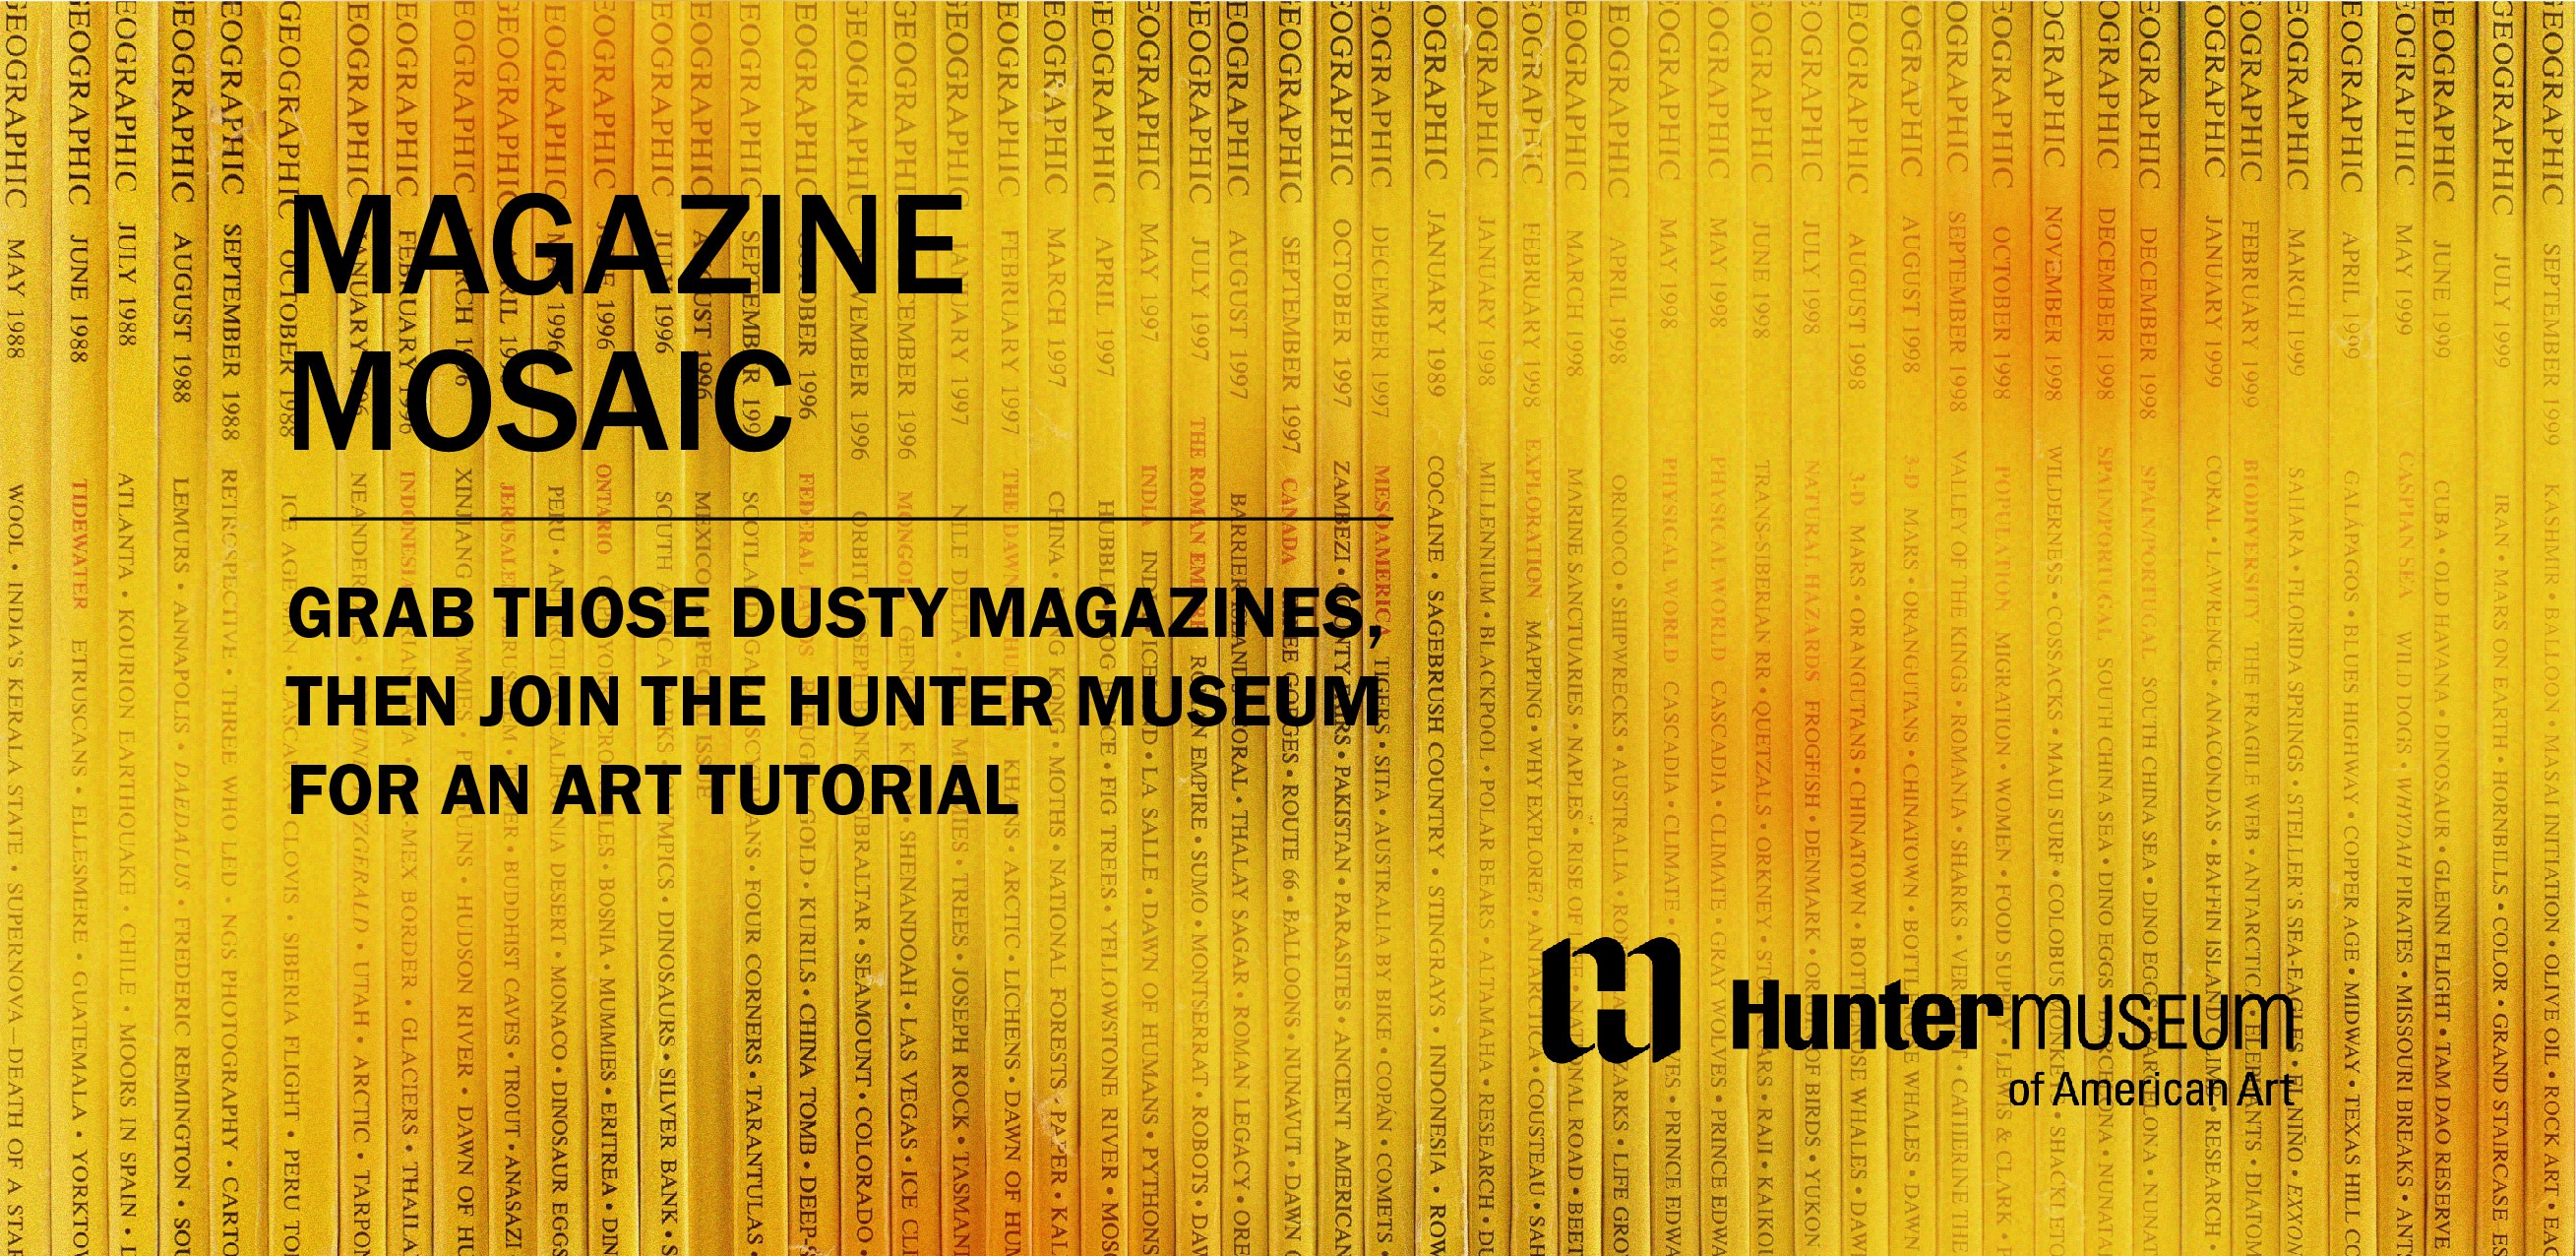 The spines of magazines closely lined up together with yellow overlaid. Text reads, "Grab those dusty magazine, then join the Hunter Museum for an art tutorial."